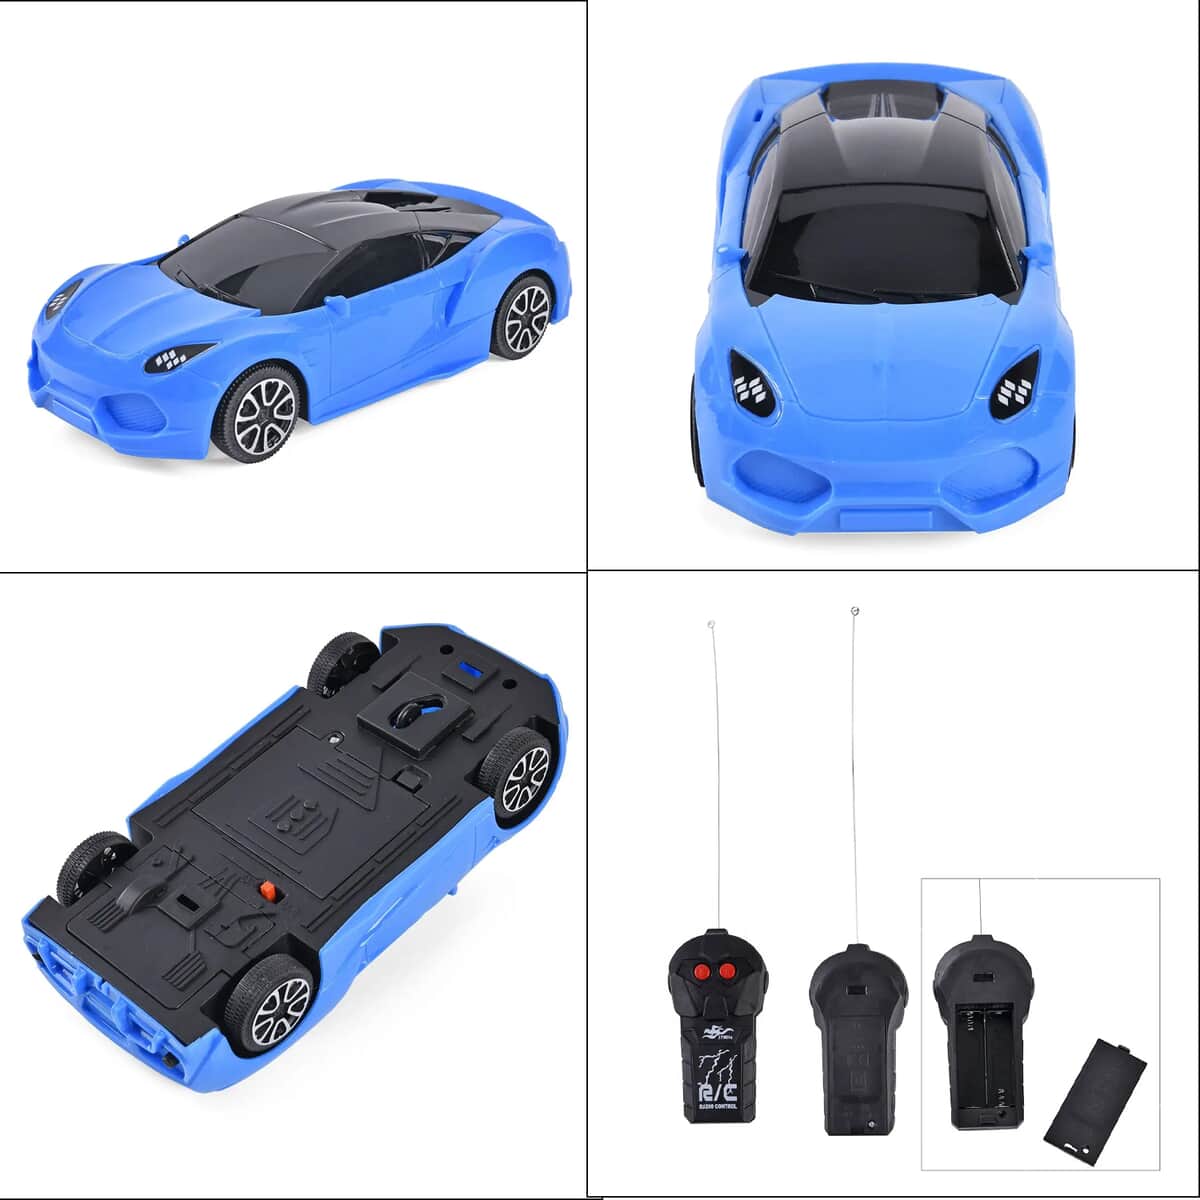 Blue 4 Channels RC Stunt Car with Lights and Remote Control, Kids Stunt Car Toy For Birthday Gift (3xAA for Car, 2xAA for Controller Battery Not Included) image number 6